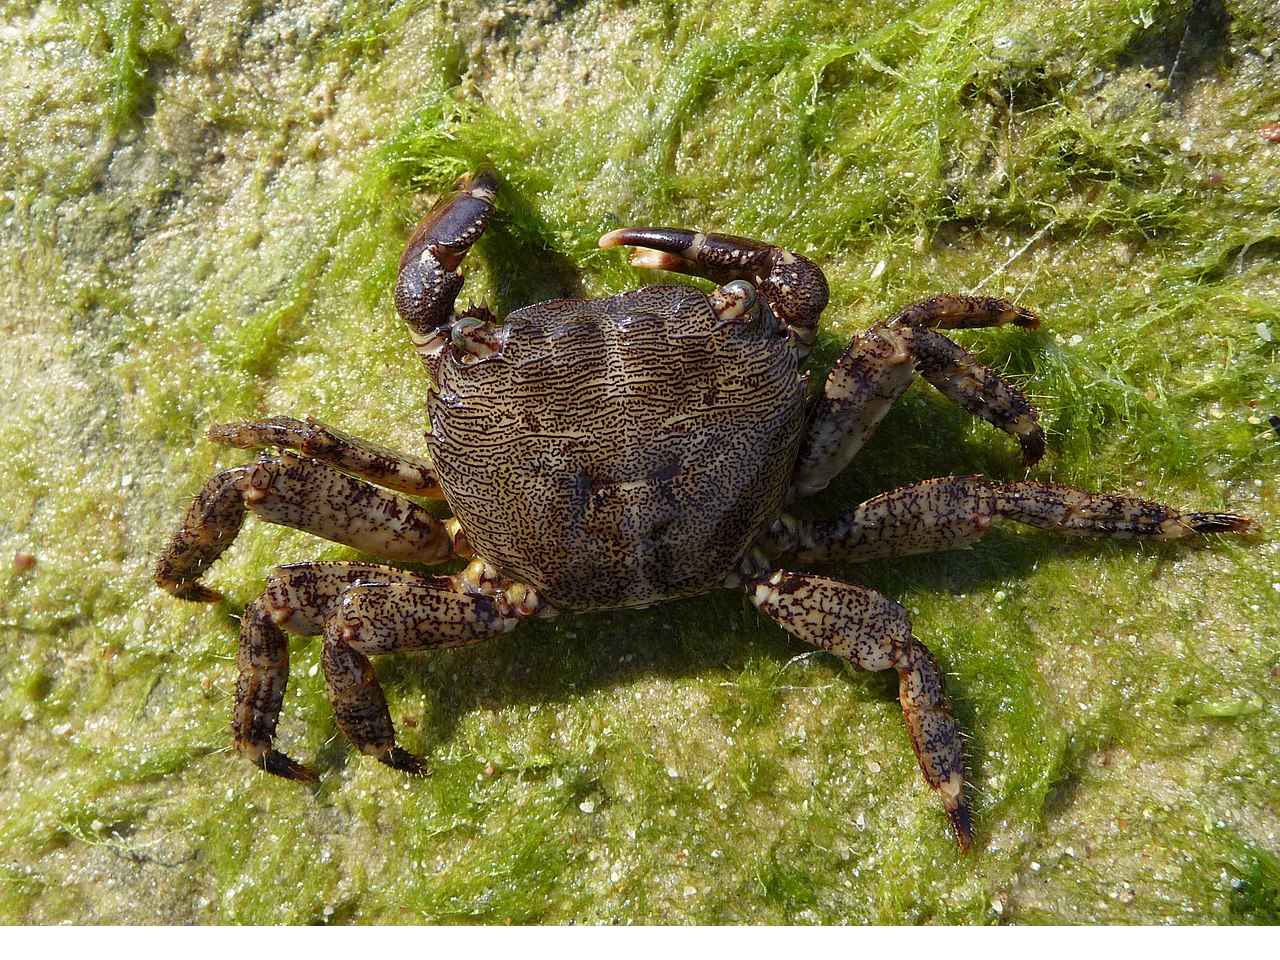 Are Crabs Consumers: Crabs Lack Typical Producer Features like Leaves and Flagella (Credit: George Chernilevsky 2009)